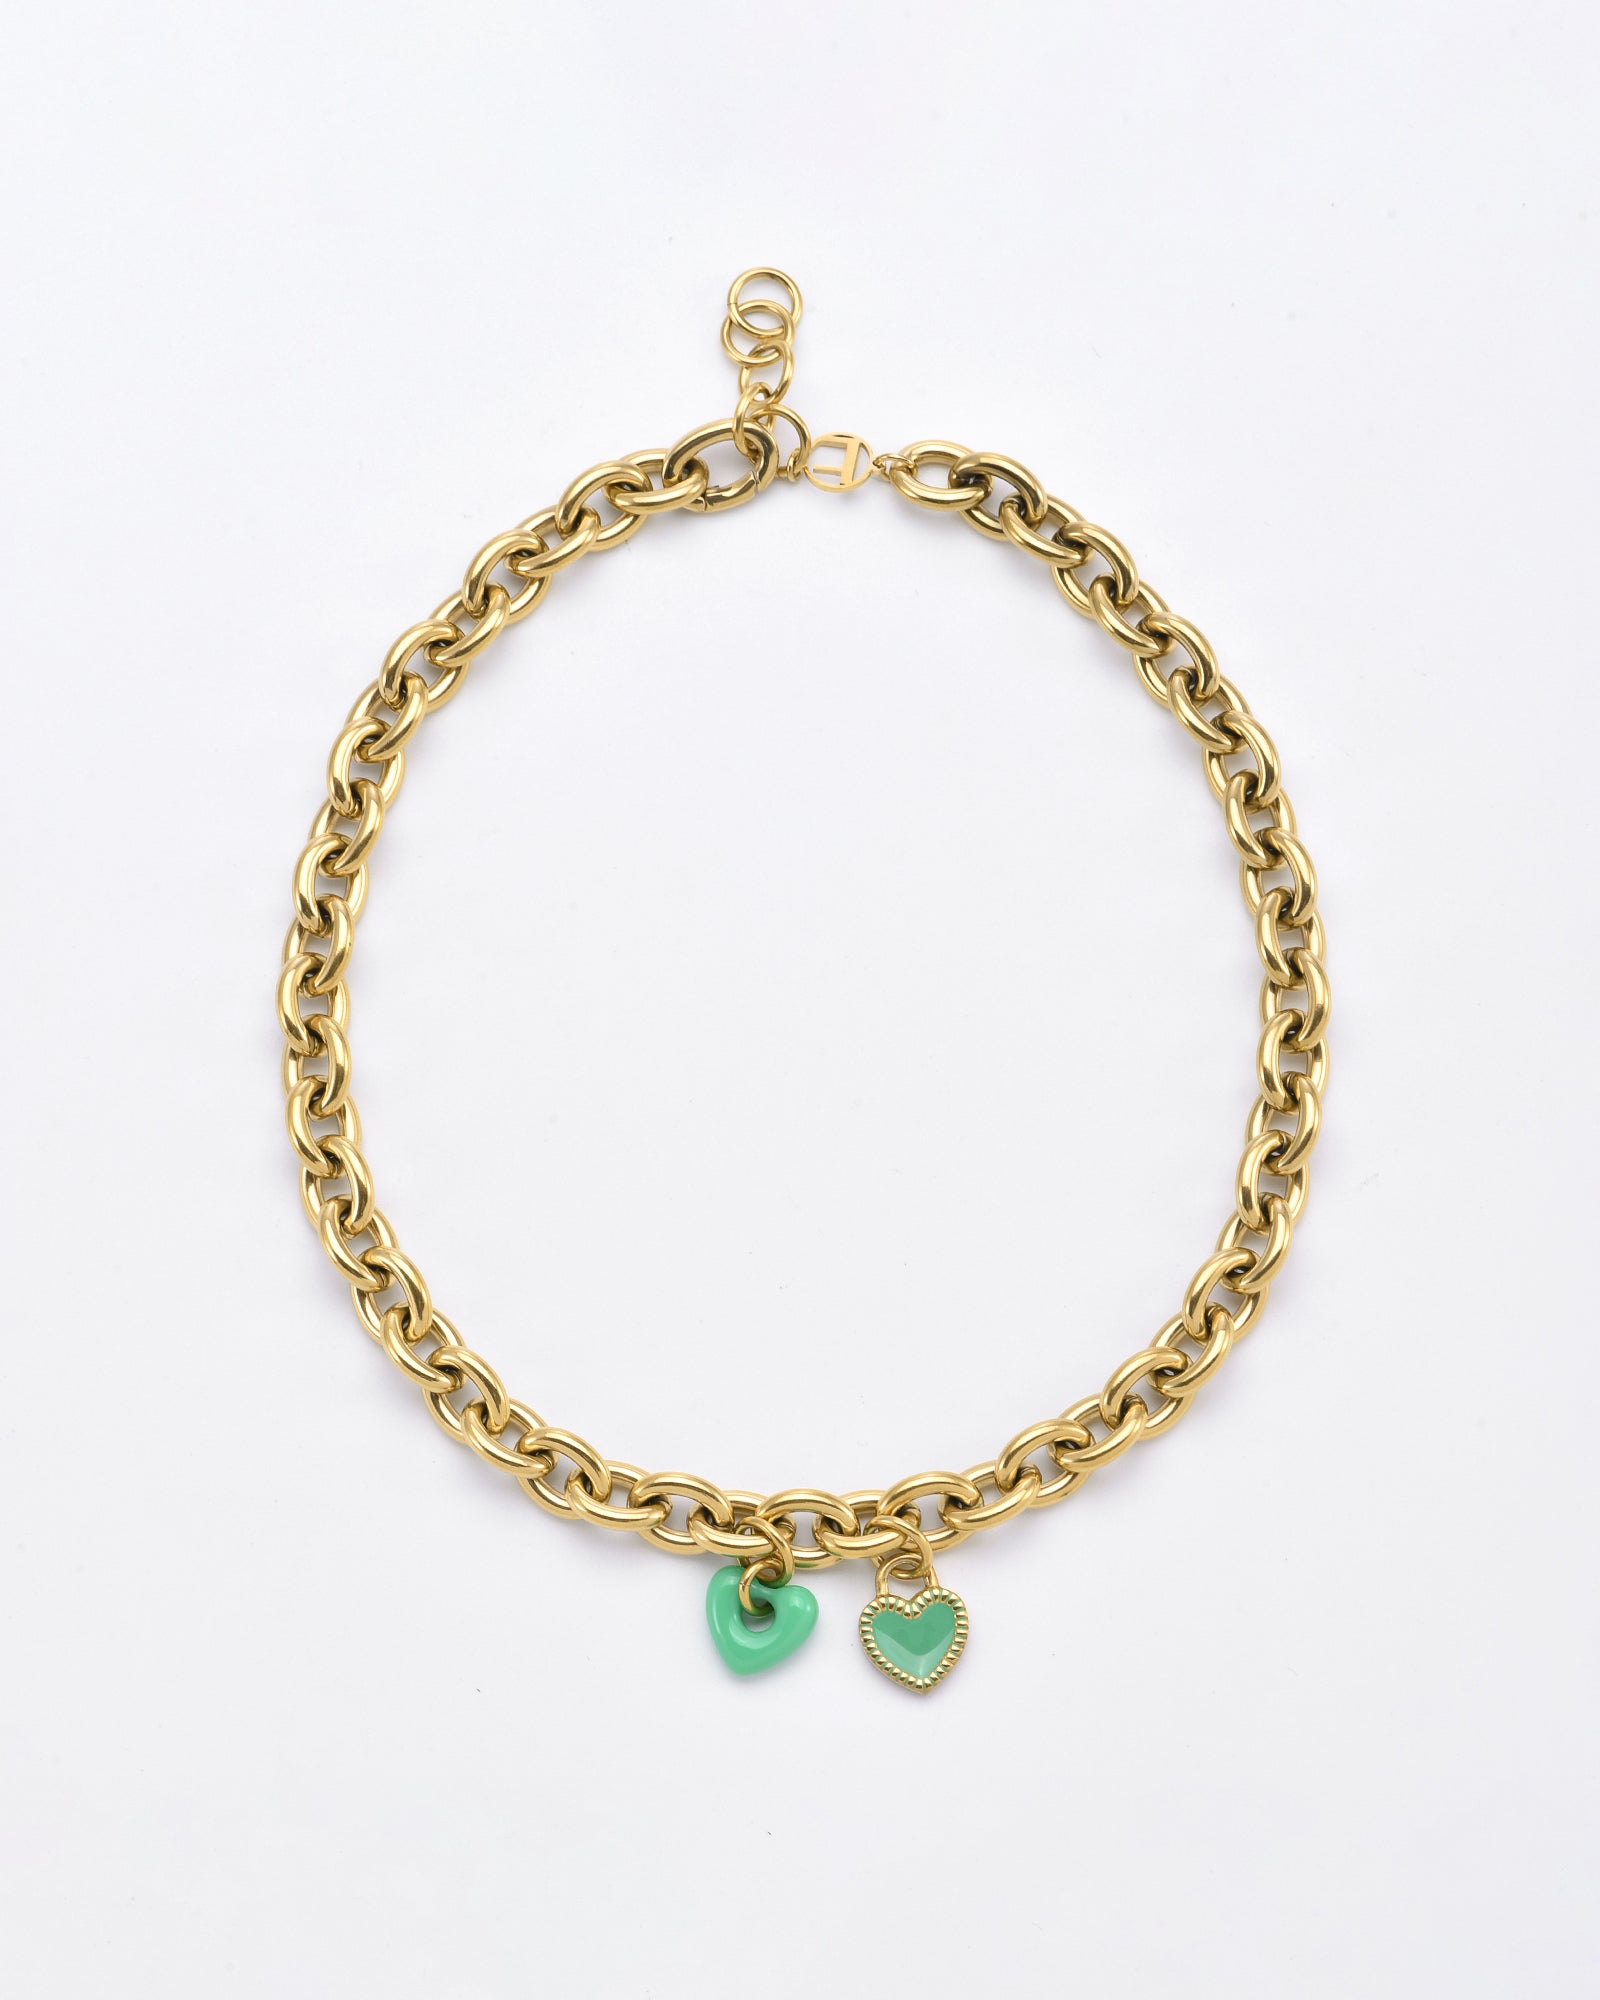 A For Art's Sake® Double Heart Necklace Gold featuring double hearts; one is a solid green charm and the other is a green outlined heart encrusted with small stones. The necklace has a lobster clasp closure.